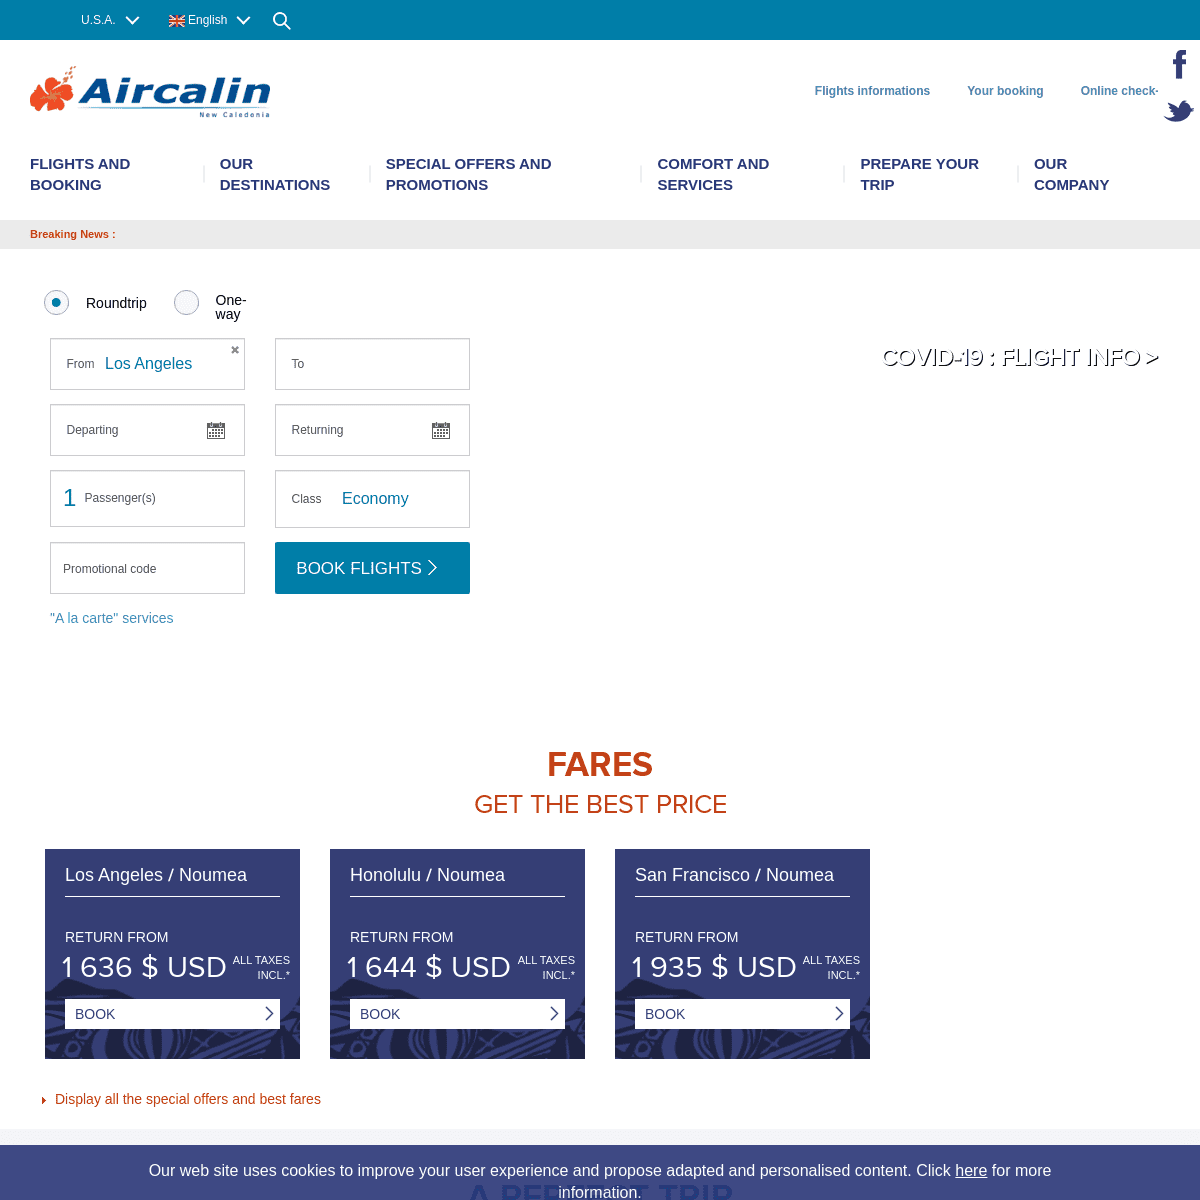 A complete backup of https://aircalin.com